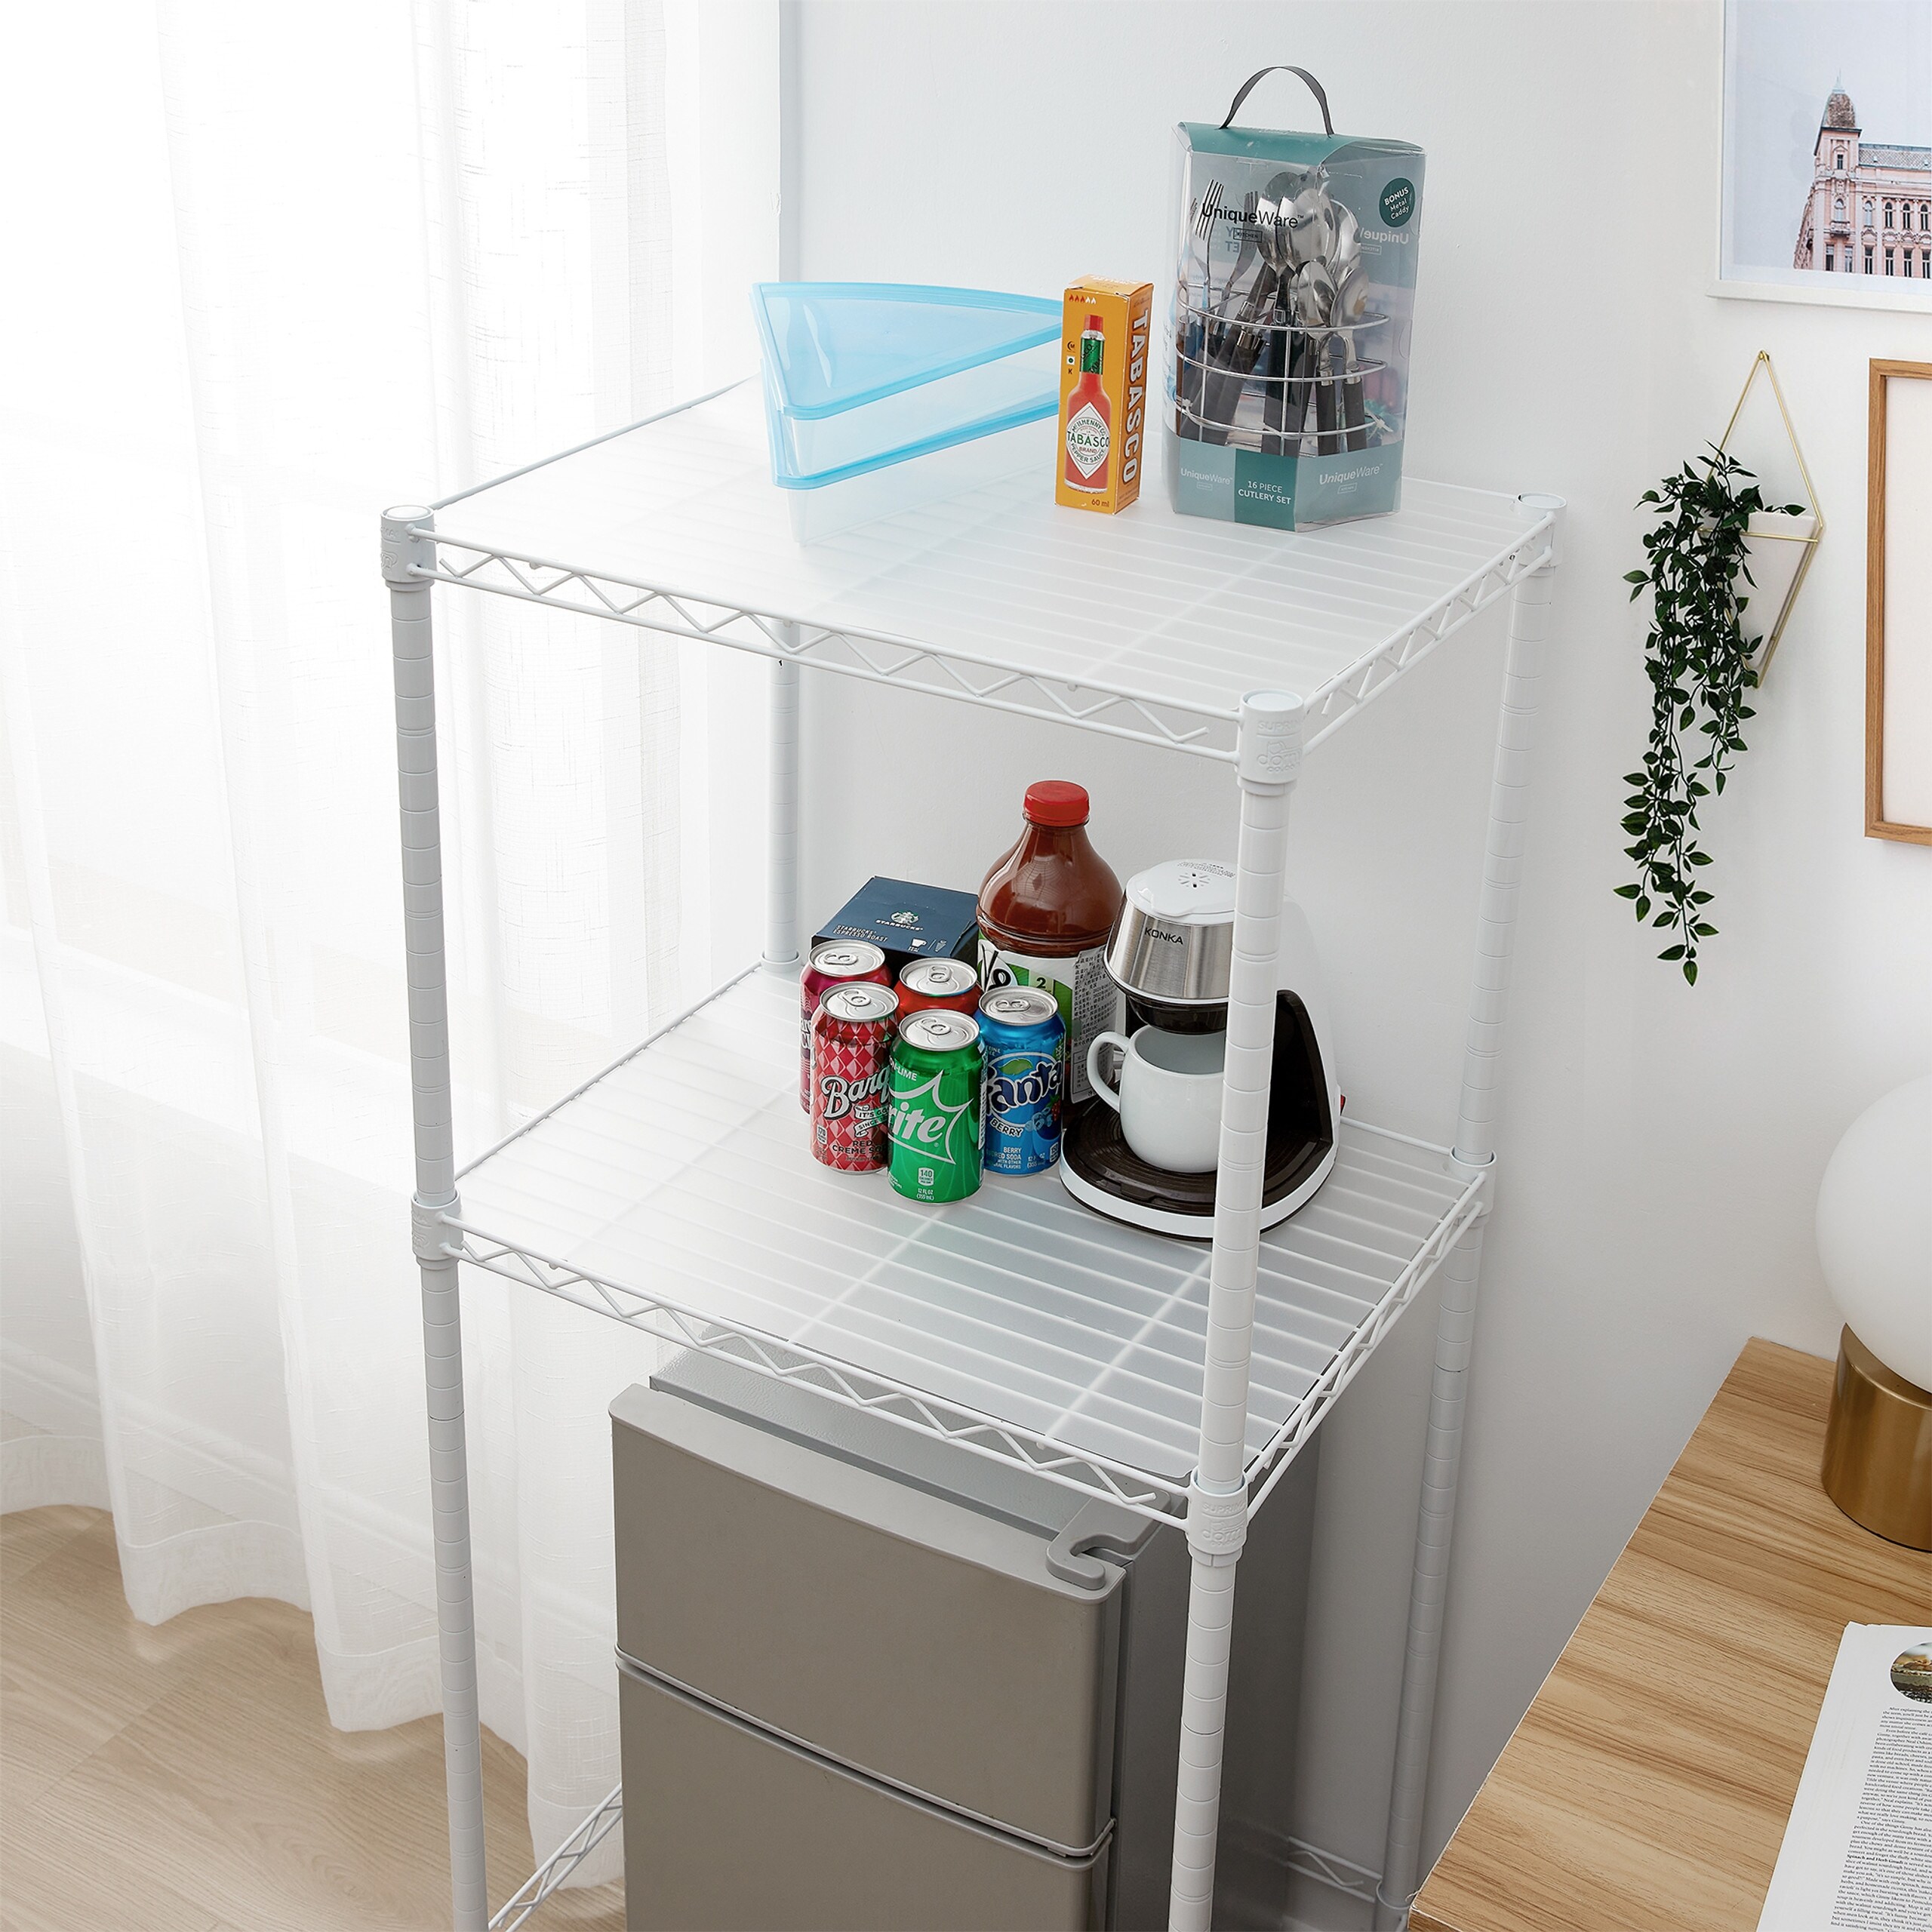 https://ak1.ostkcdn.com/images/products/is/images/direct/80d9ab02592d9eb3c820ec9f91ccf16c9f68ea9b/Mini-Shelf-Supreme---Suprima%C2%AE-Adjustable-Shelving.jpg